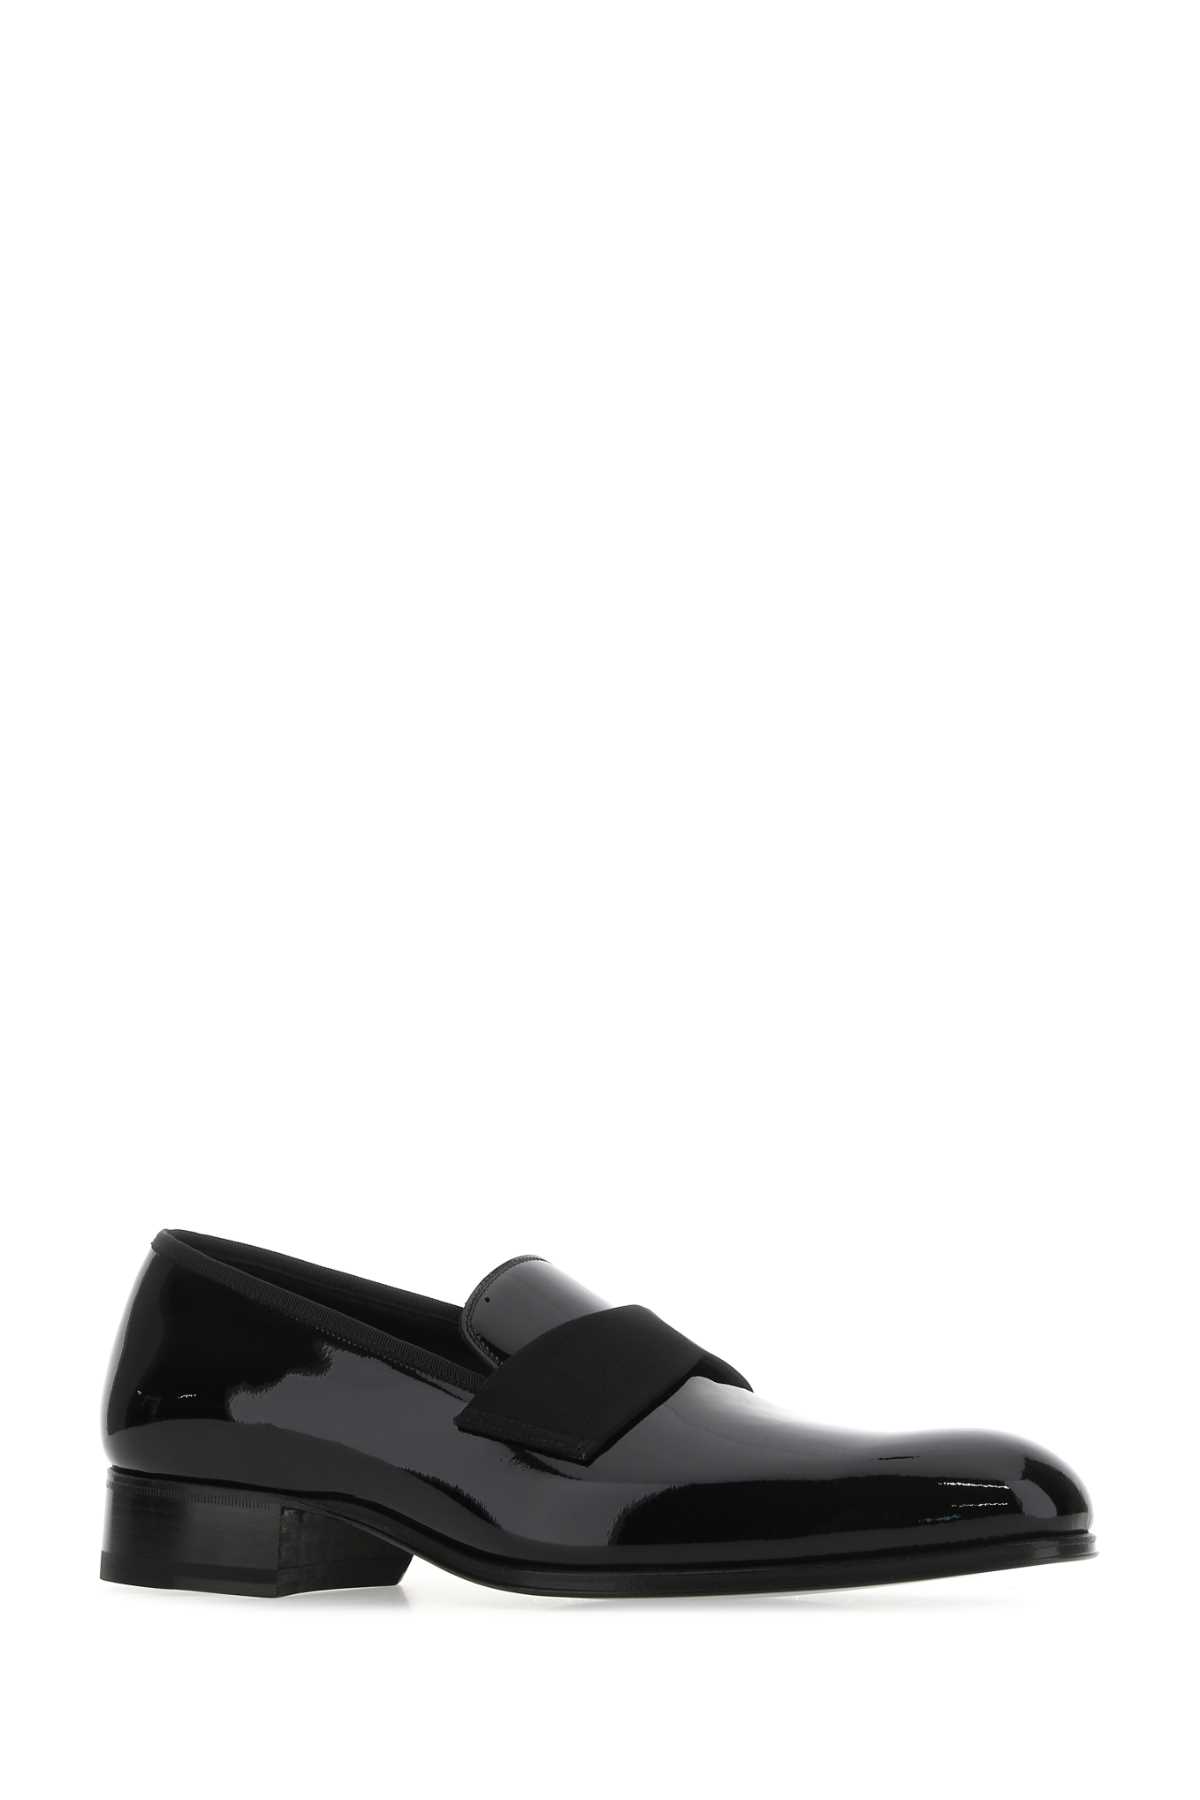 TOM FORD BLACK LEATHER LOAFERS